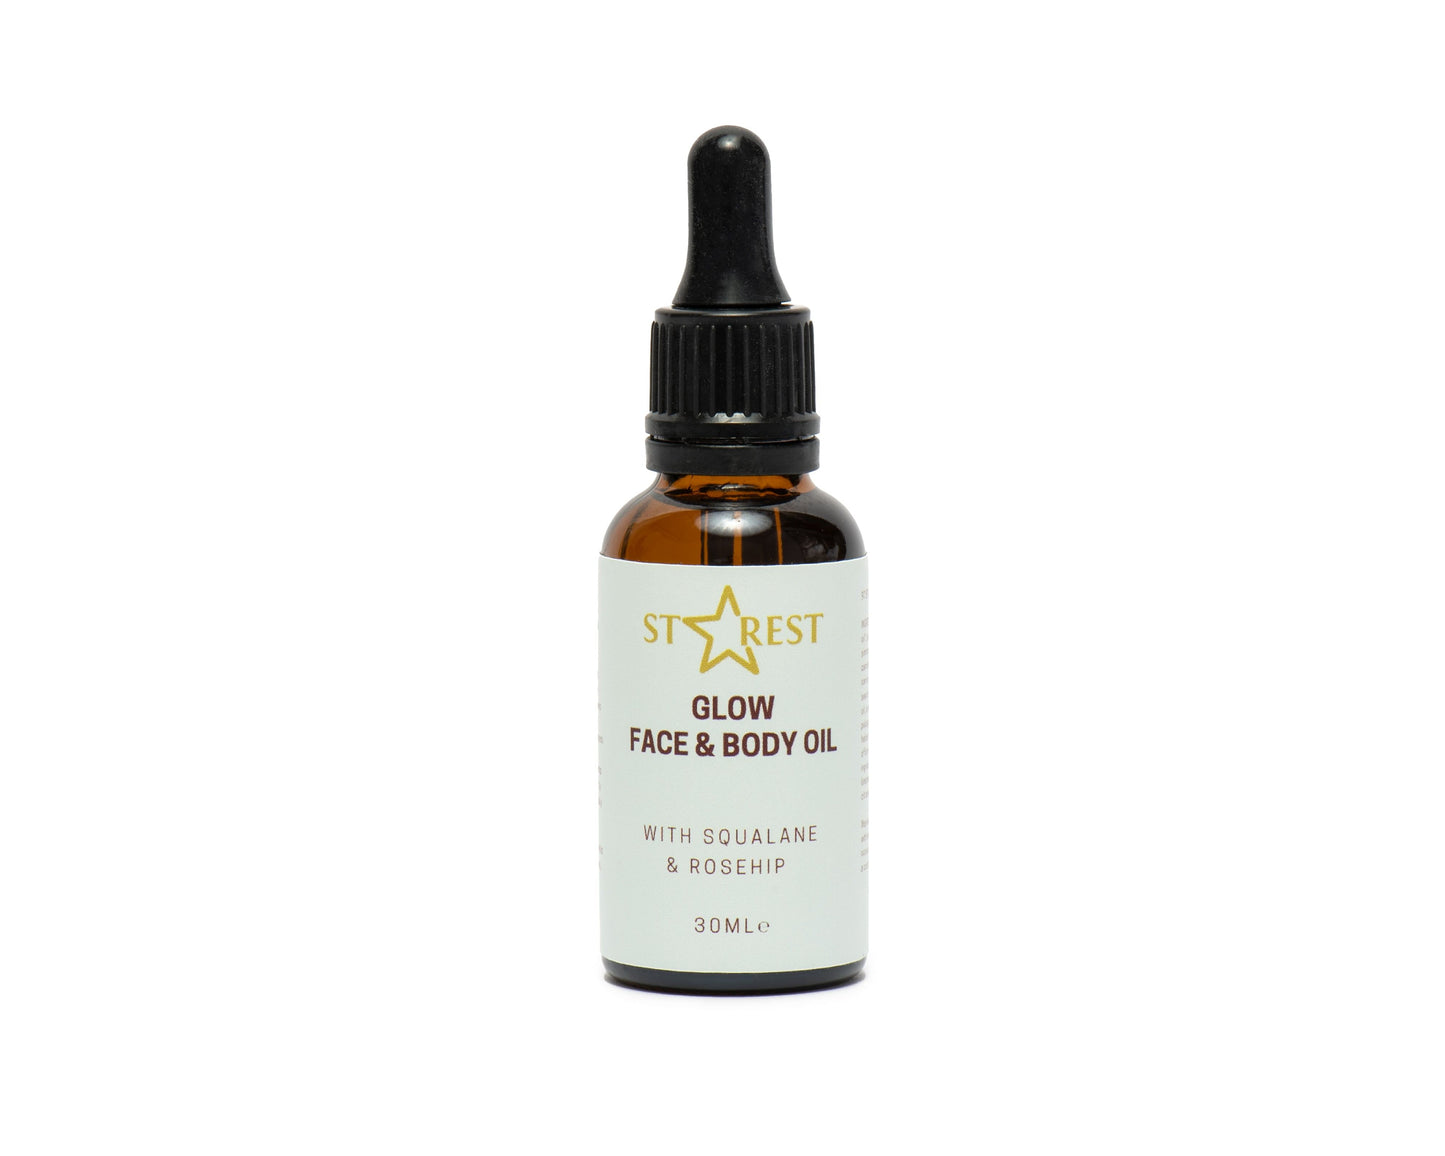 Glow Face and Body Oil